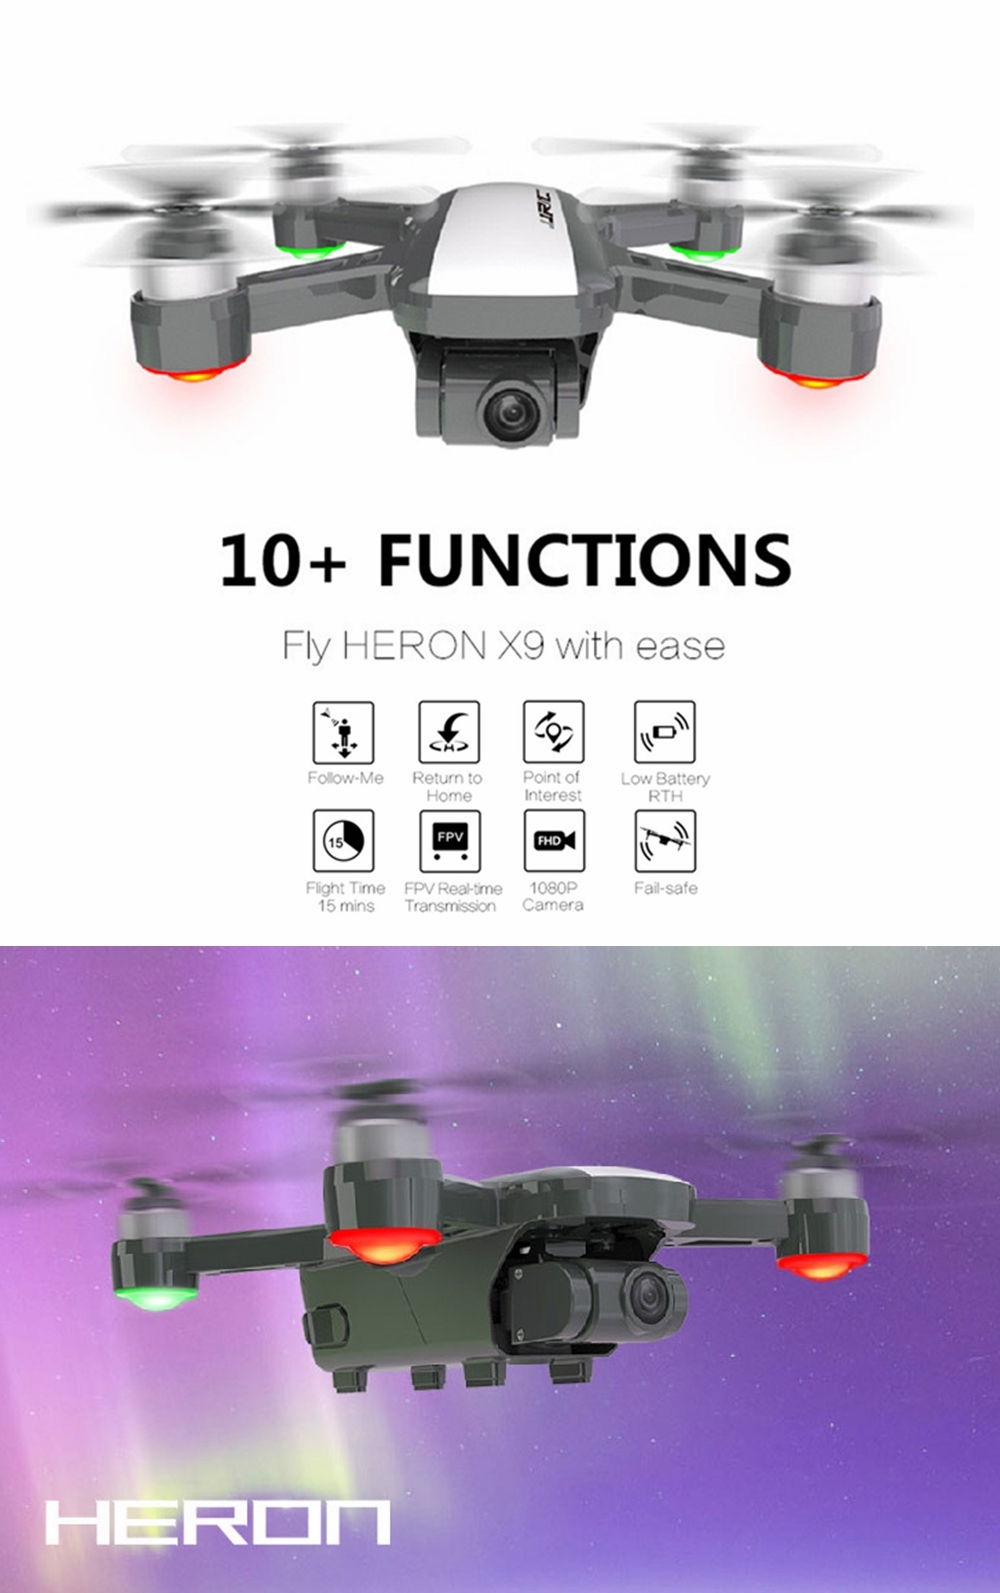 JJRC X9 Heron GPS 5G WiFi FPV with 1080P Camera Optical Flow Positioning RC Drone Quadcopter RTF